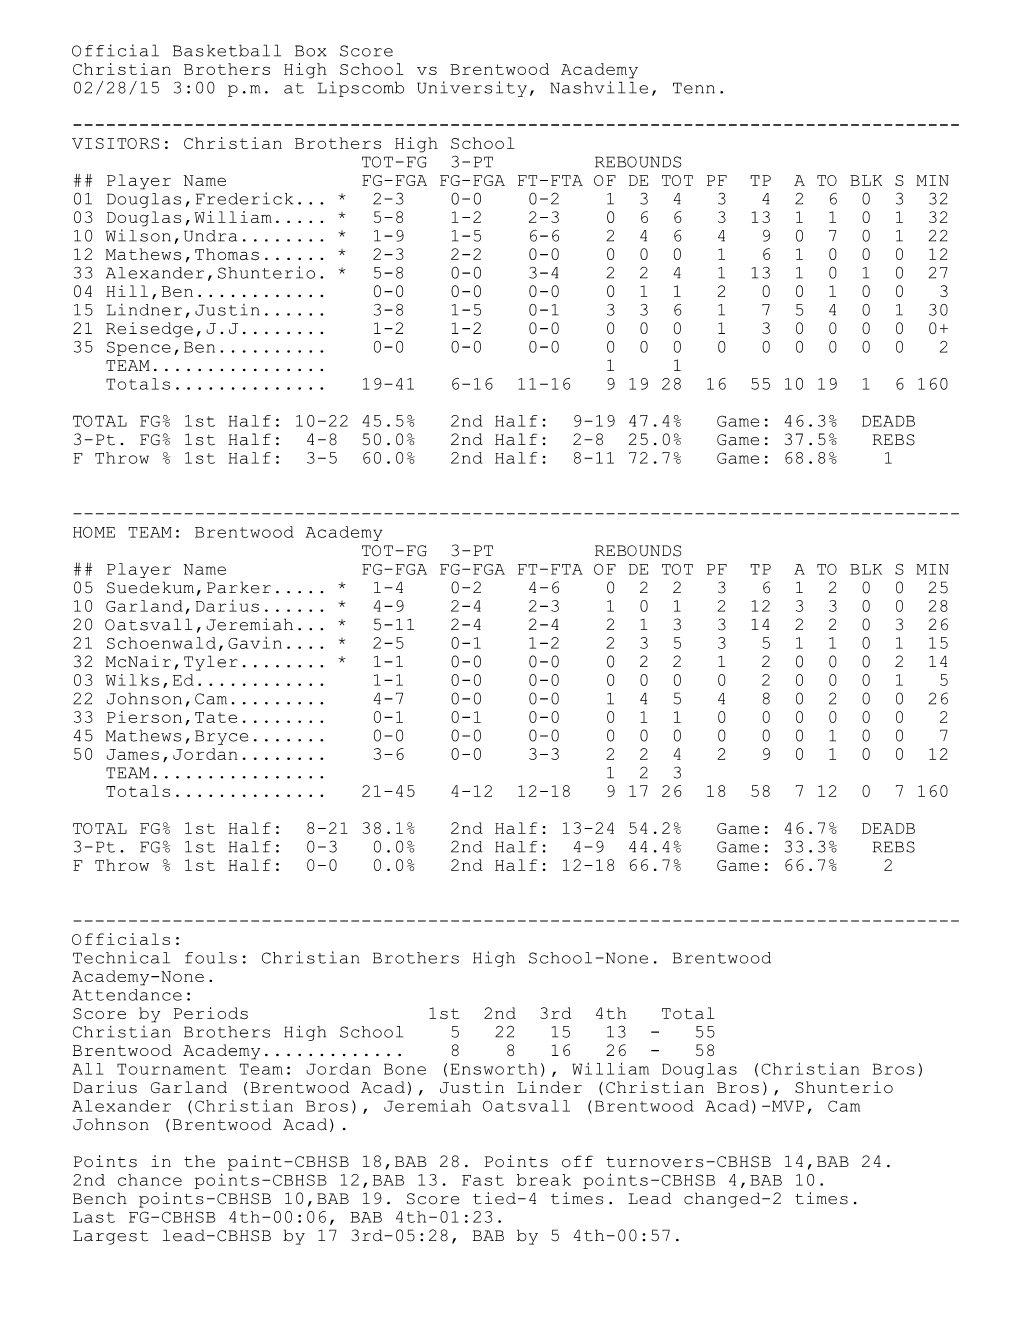 Official Basketball Box Score Christian Brothers High School Vs Brentwood Academy 02/28/15 3:00 P.M